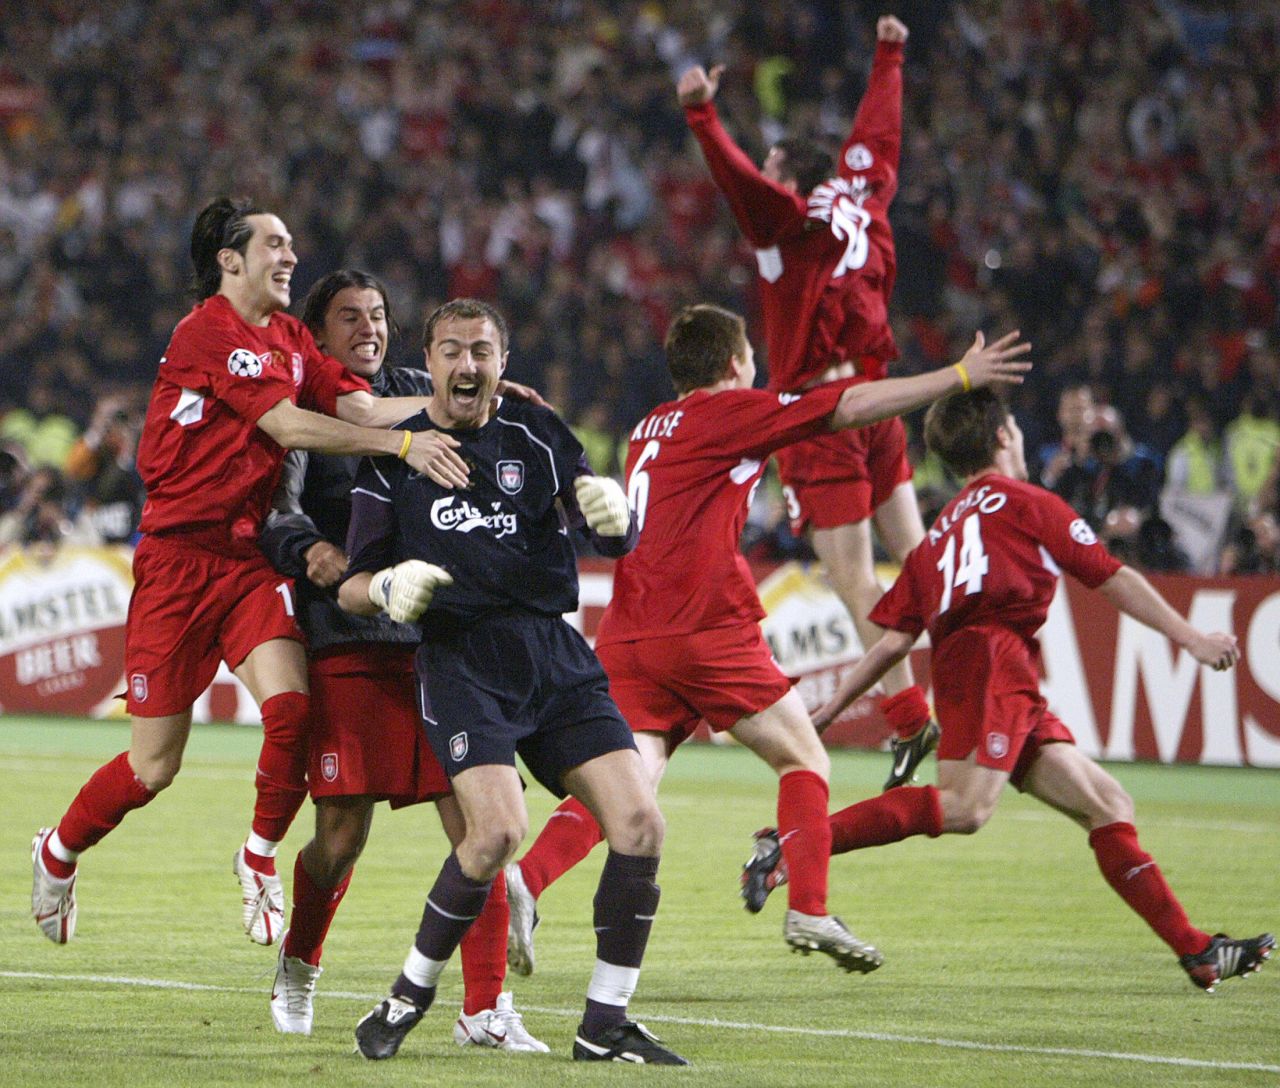 Liverpool captain Steven Gerrard famously slept with the trophy in his bed after his team's sensational win in European football's Champions League in 2005. But all 11 men on the pitch had to keep cool heads as Liverpool came back from 3-0 down at halftime to beat Italy's AC Milan on penalties in the final.